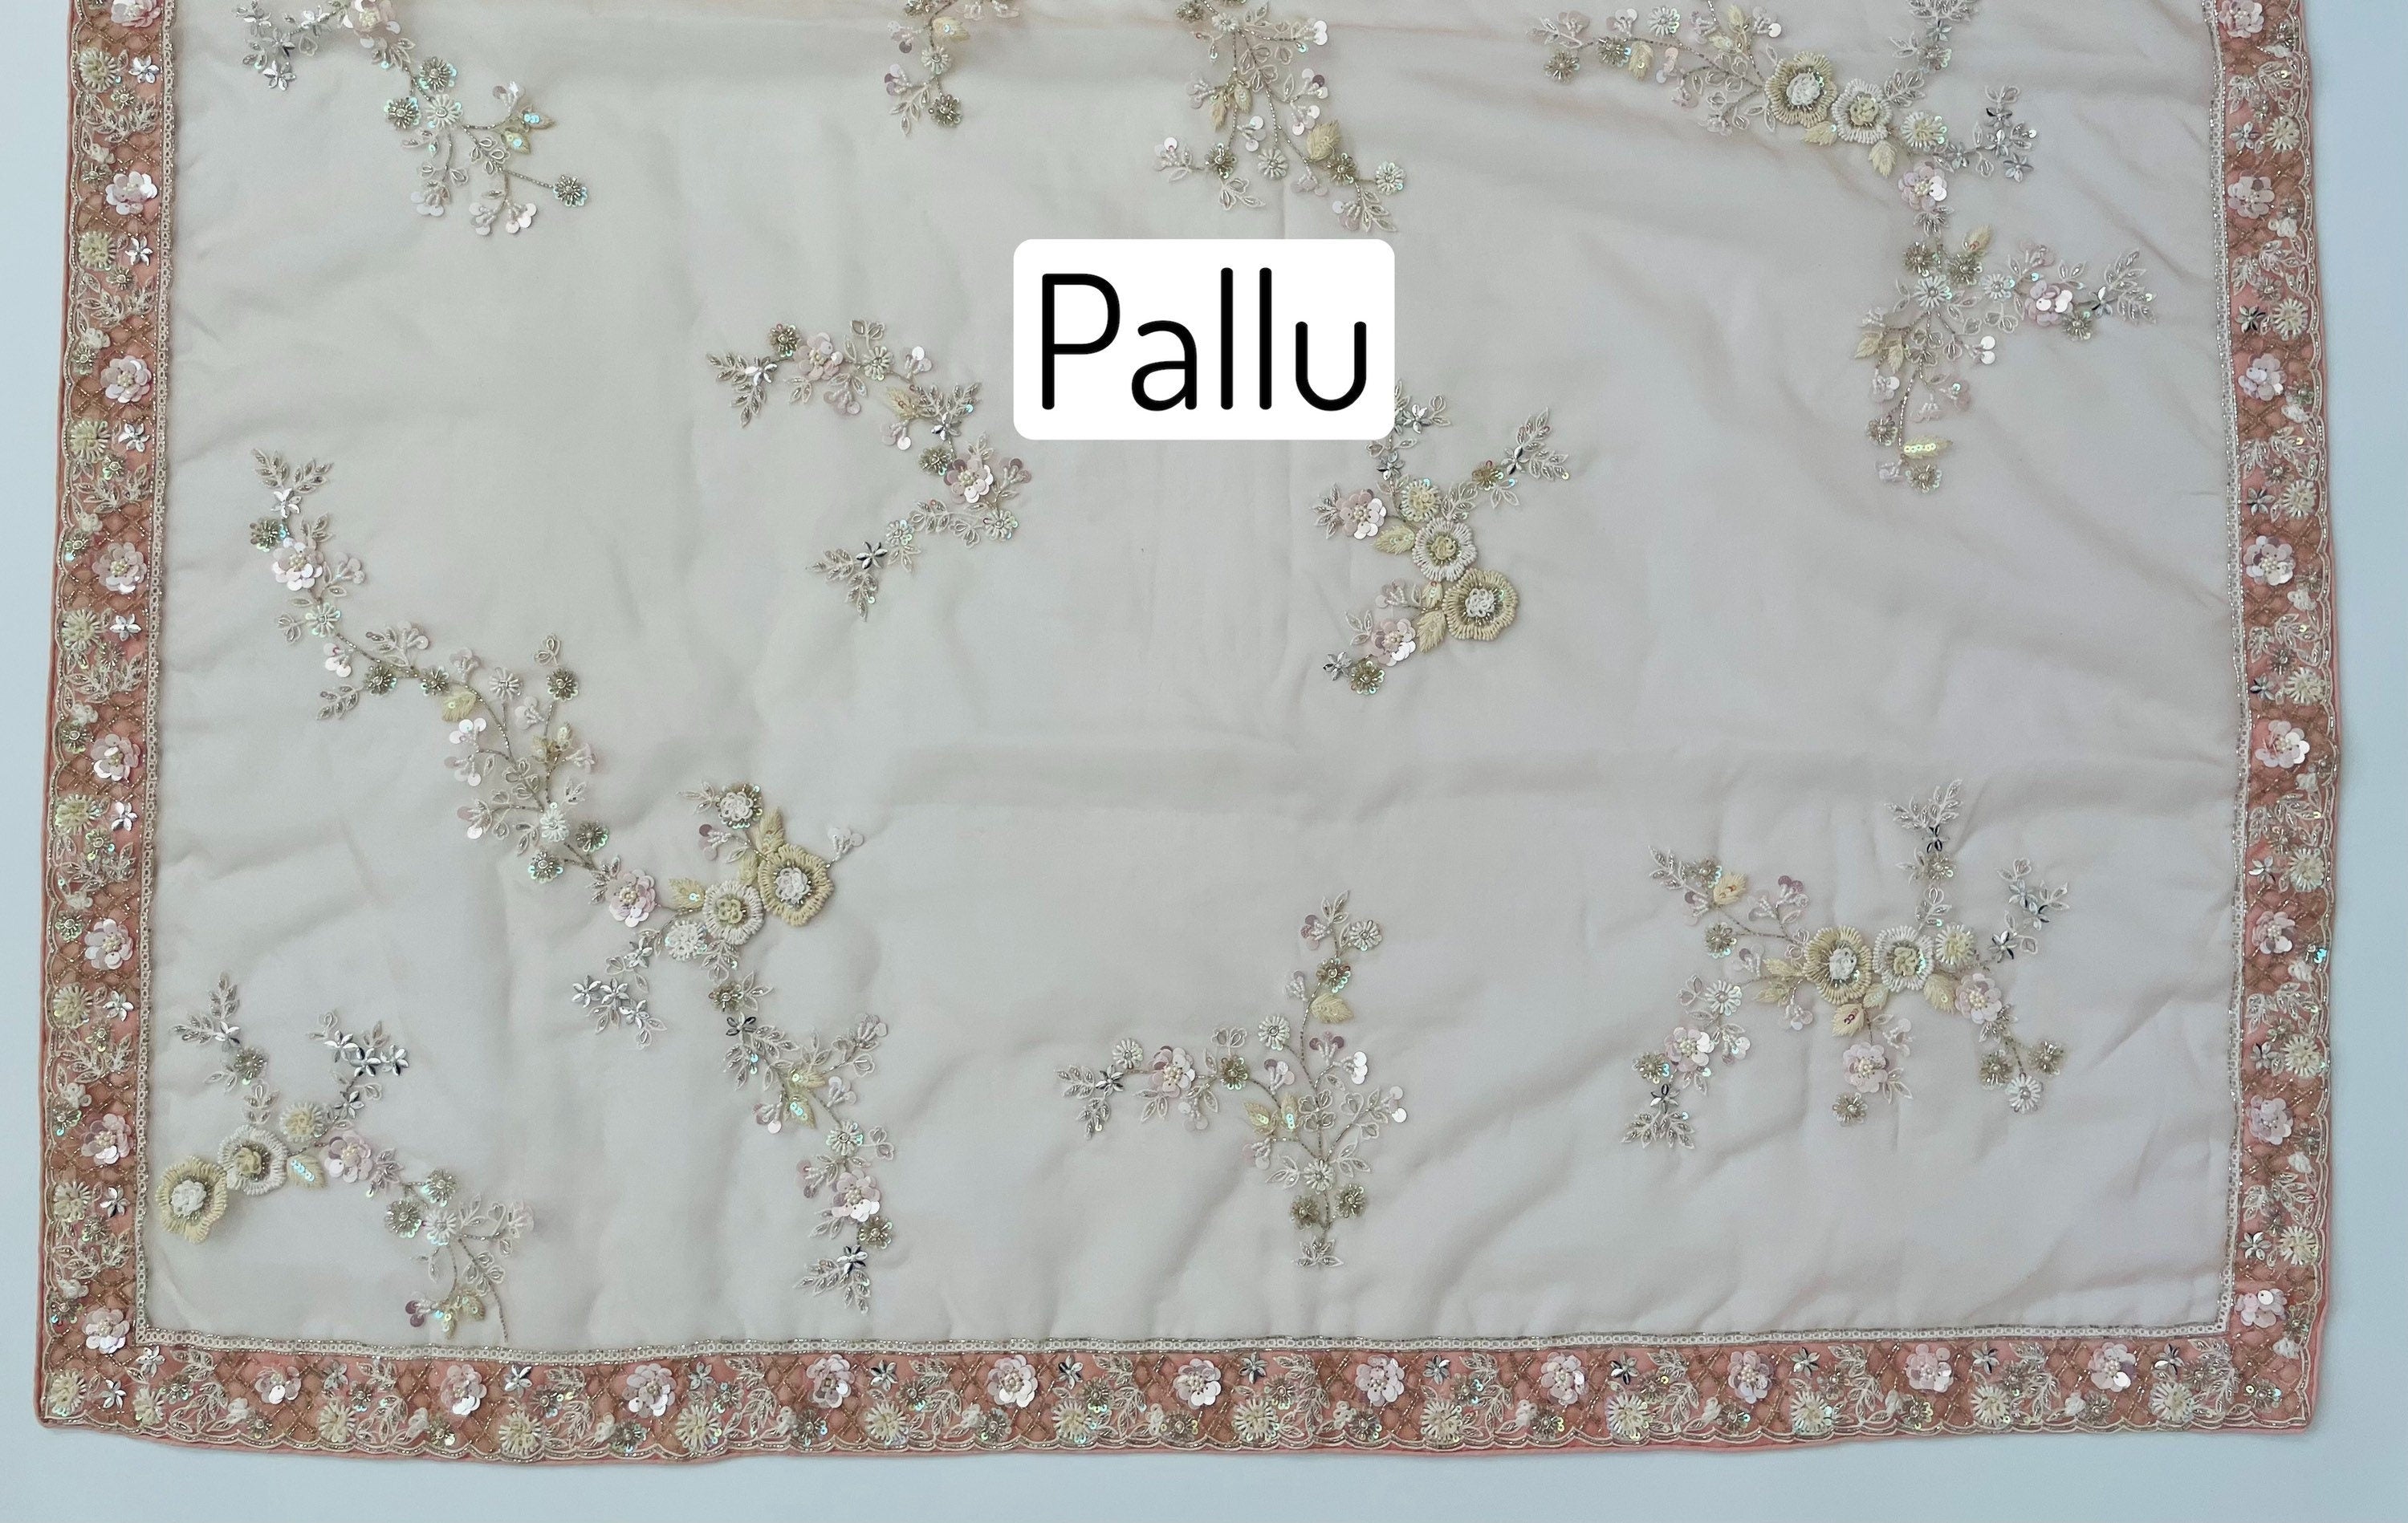 Handmade Premium Organza Saree | Shade of French Rose | Hand Embroidery | Ships from California